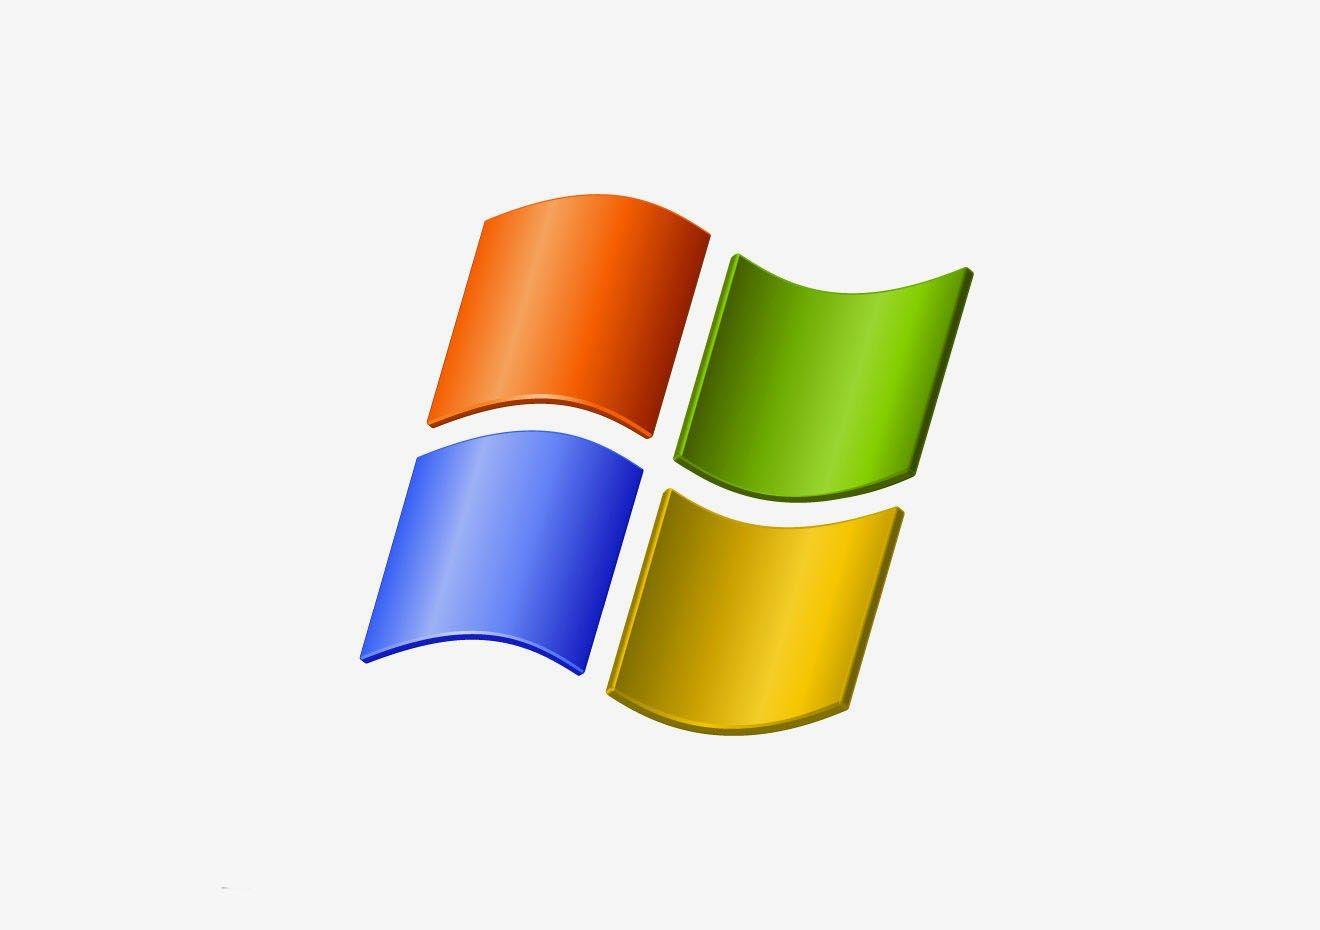 WinXP Logo - Windows XP Makes Ransomware and Other Threats So Much Worse | WIRED